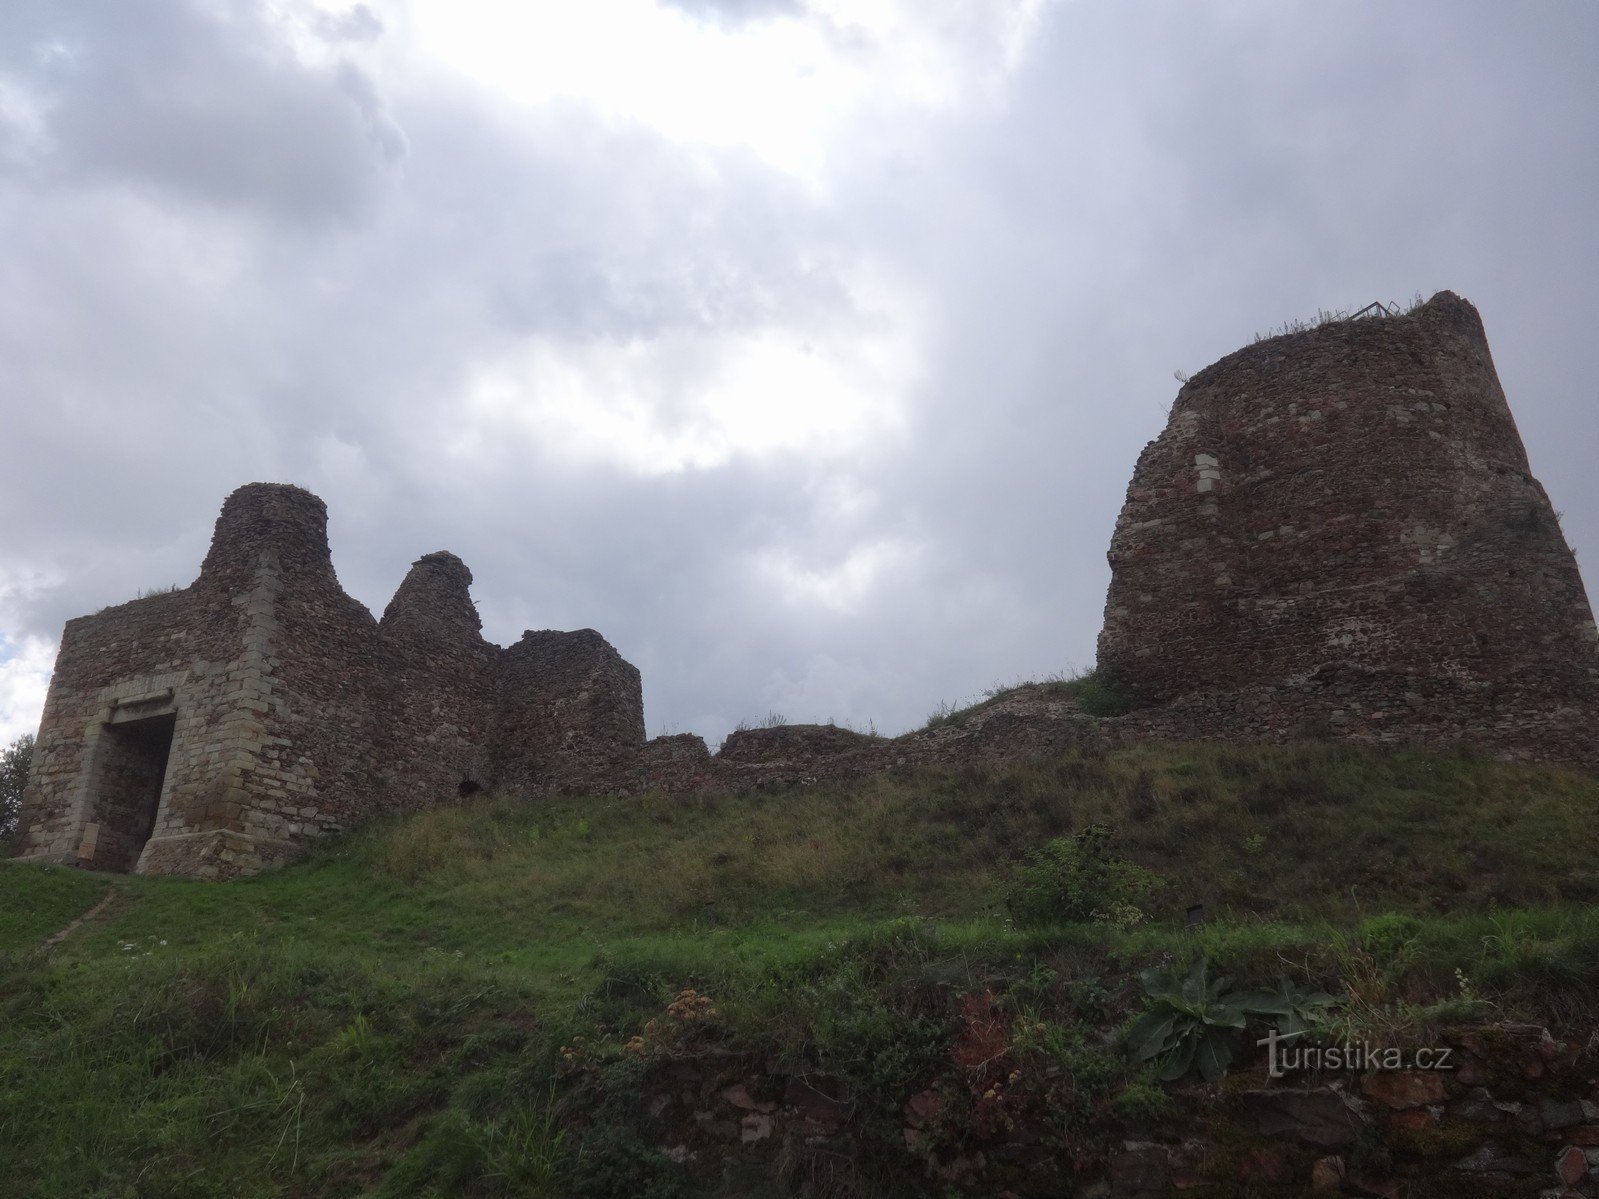 The ruins of Lichnice Castle in the Iron Mountains